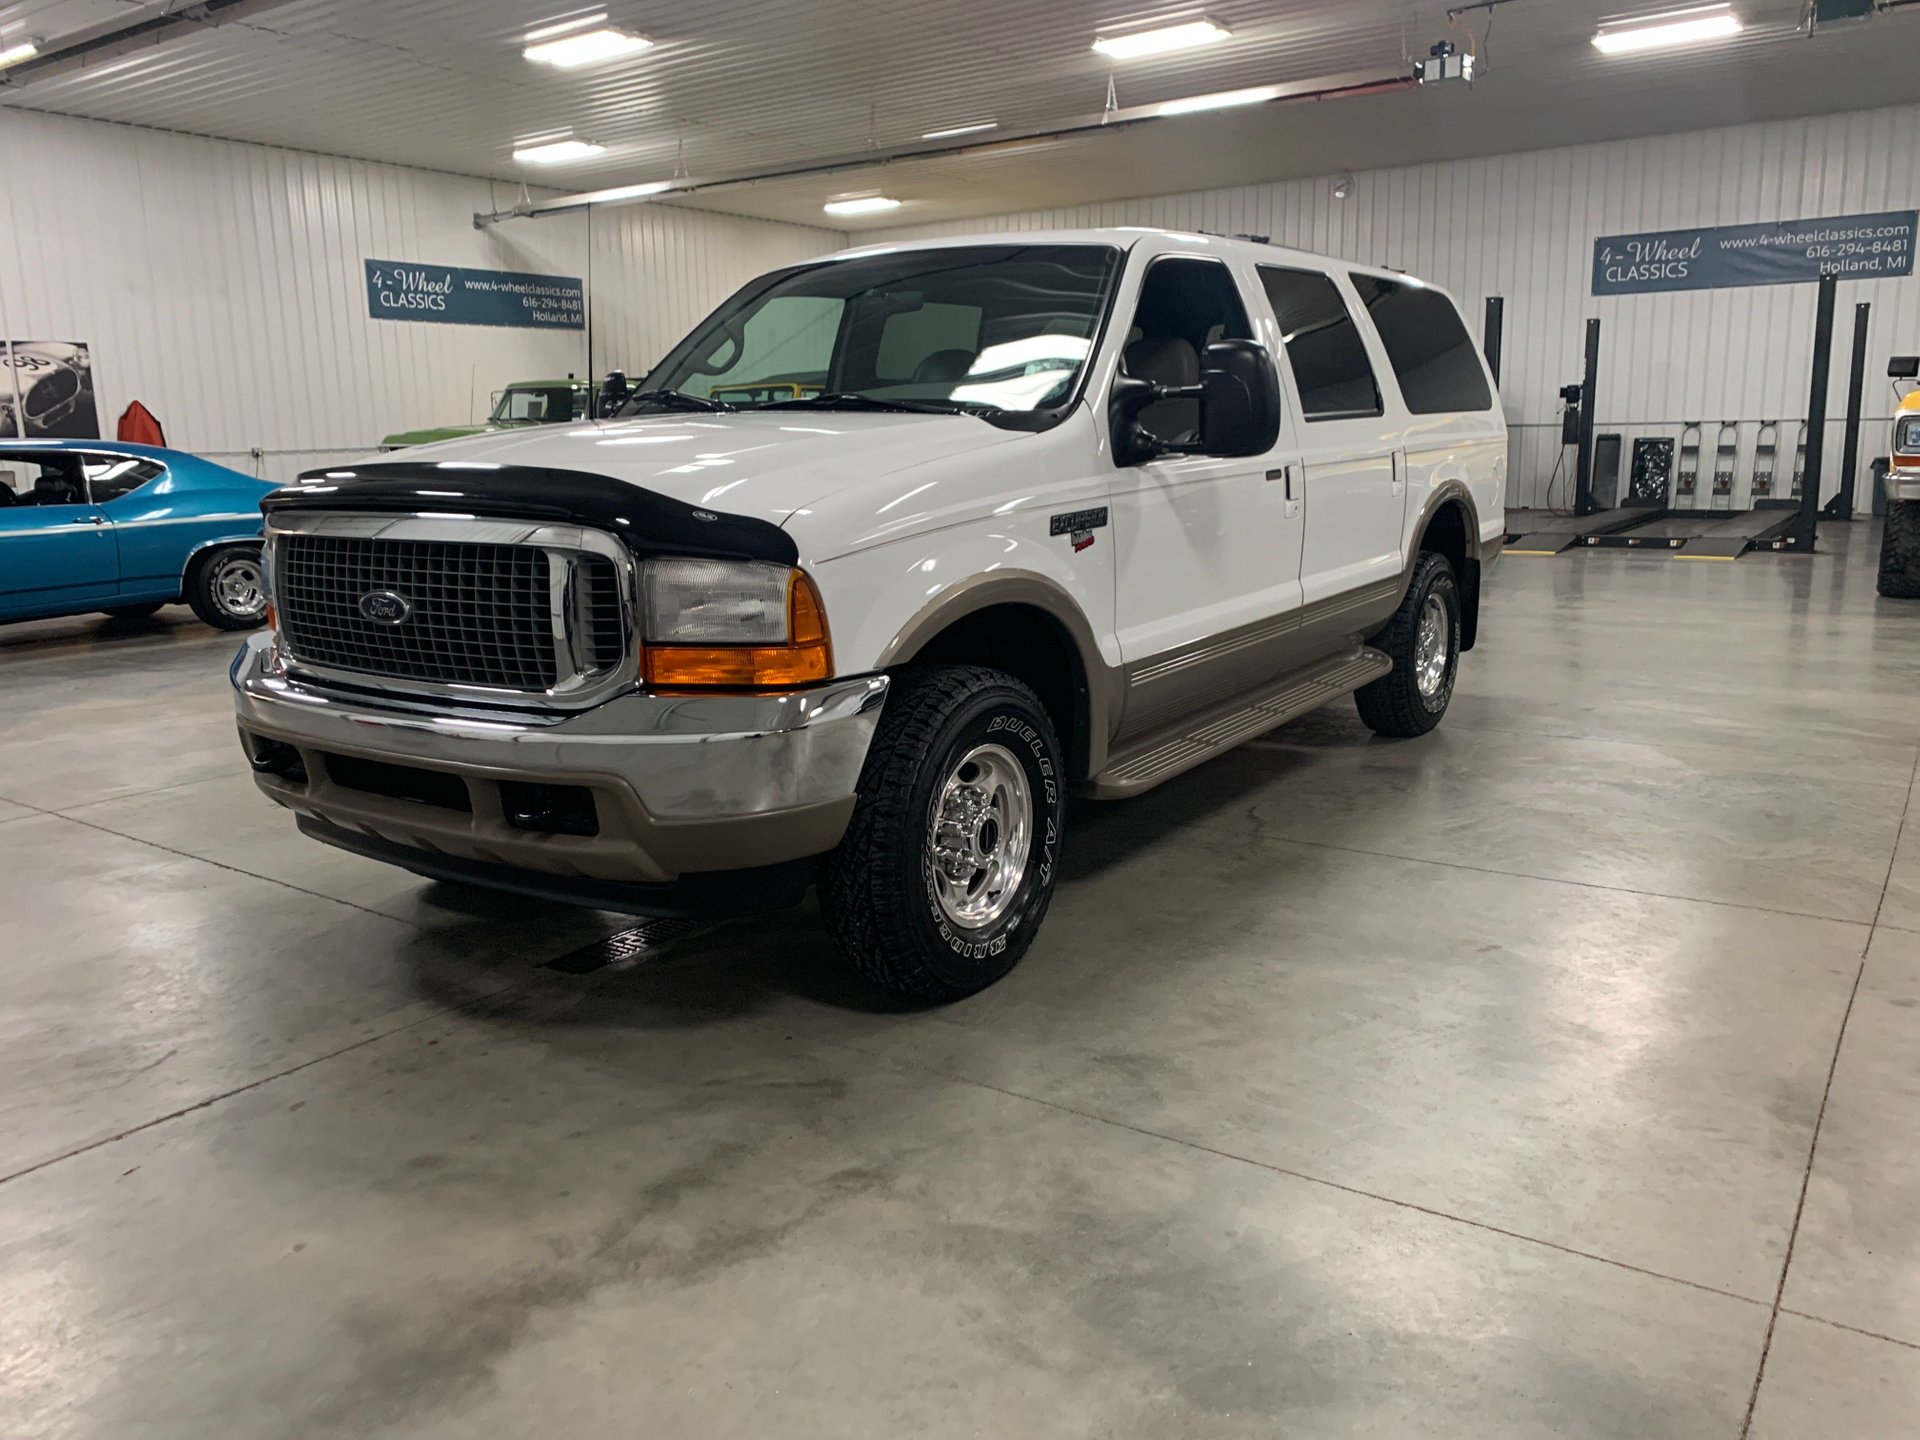 msrp of 2000 ford excursion